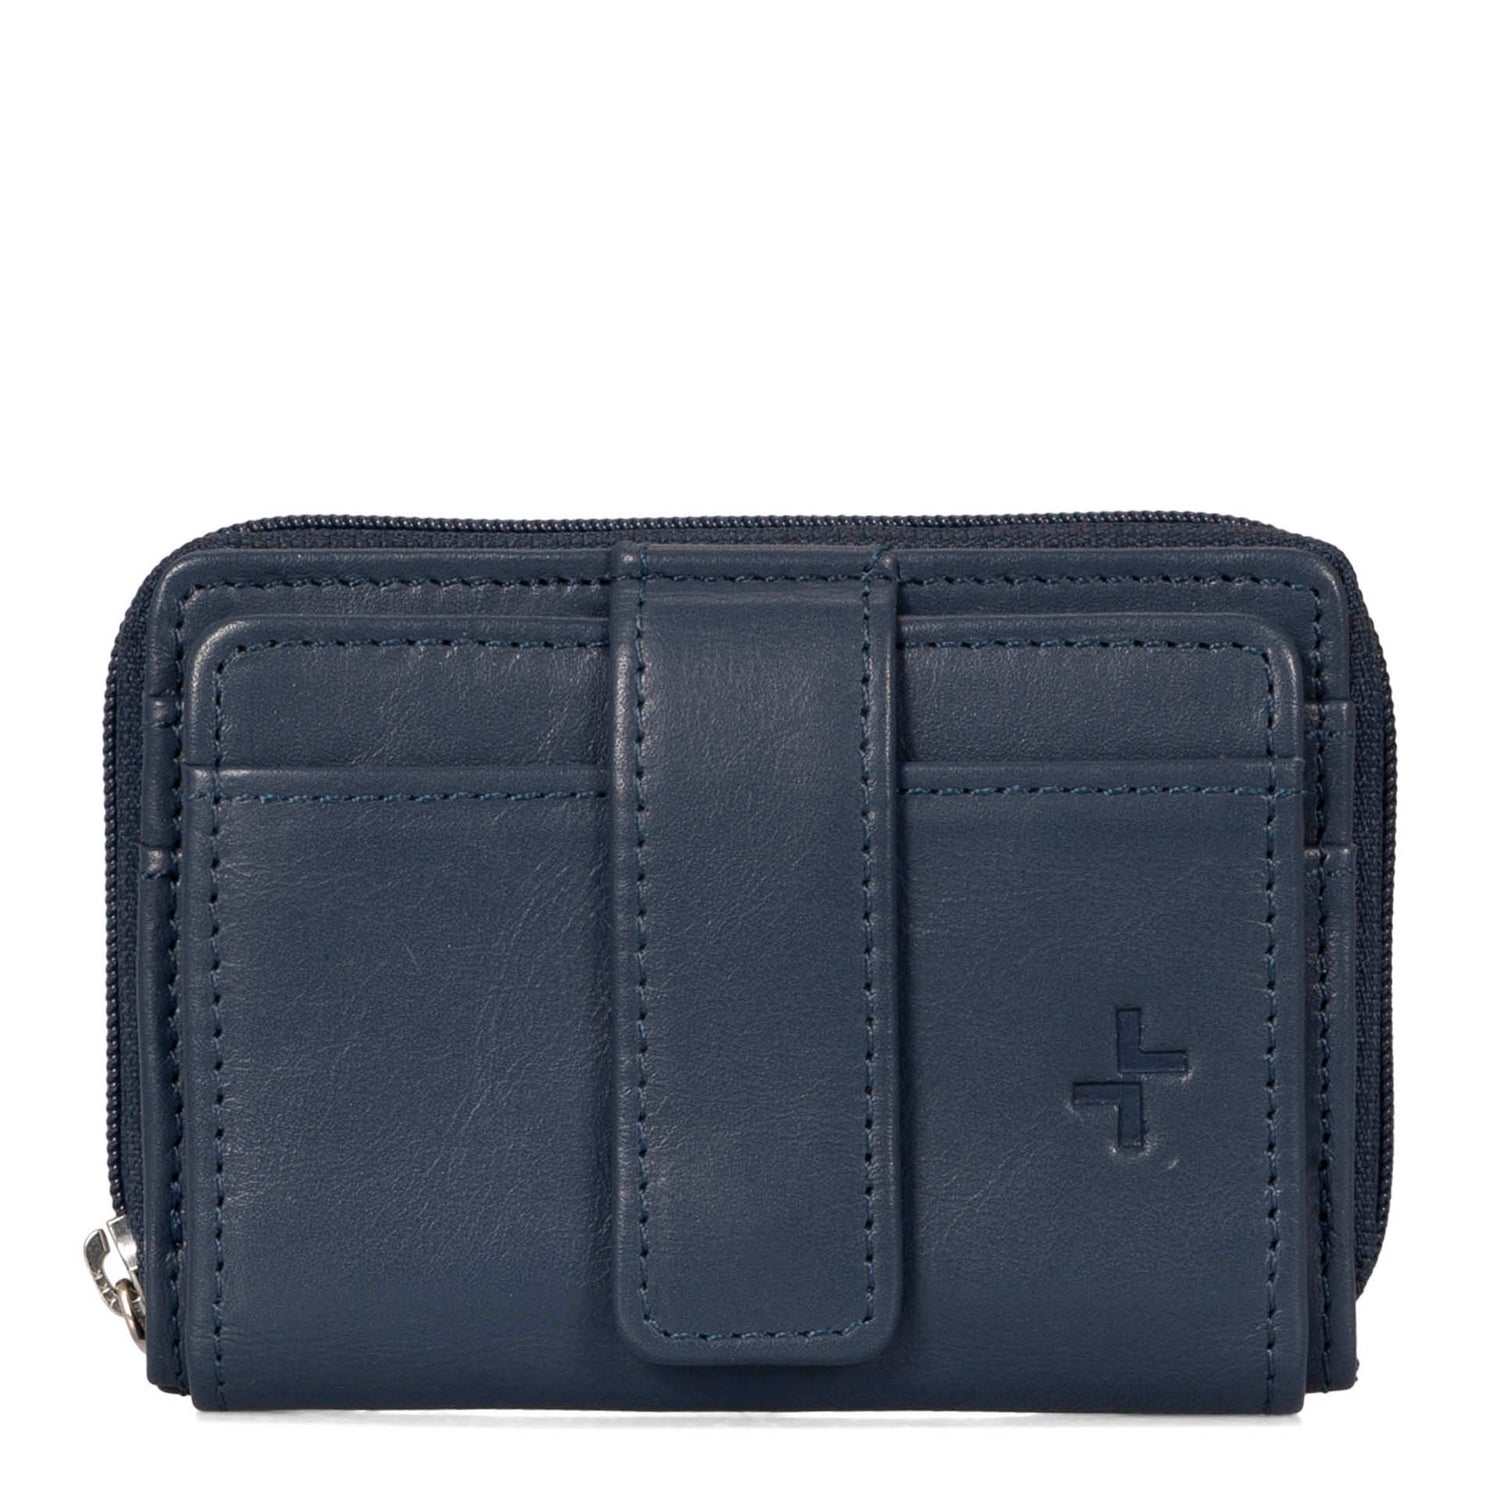 Front side of a blue card holder called basics by tracker, showing its 2 front card slots and closure strap.